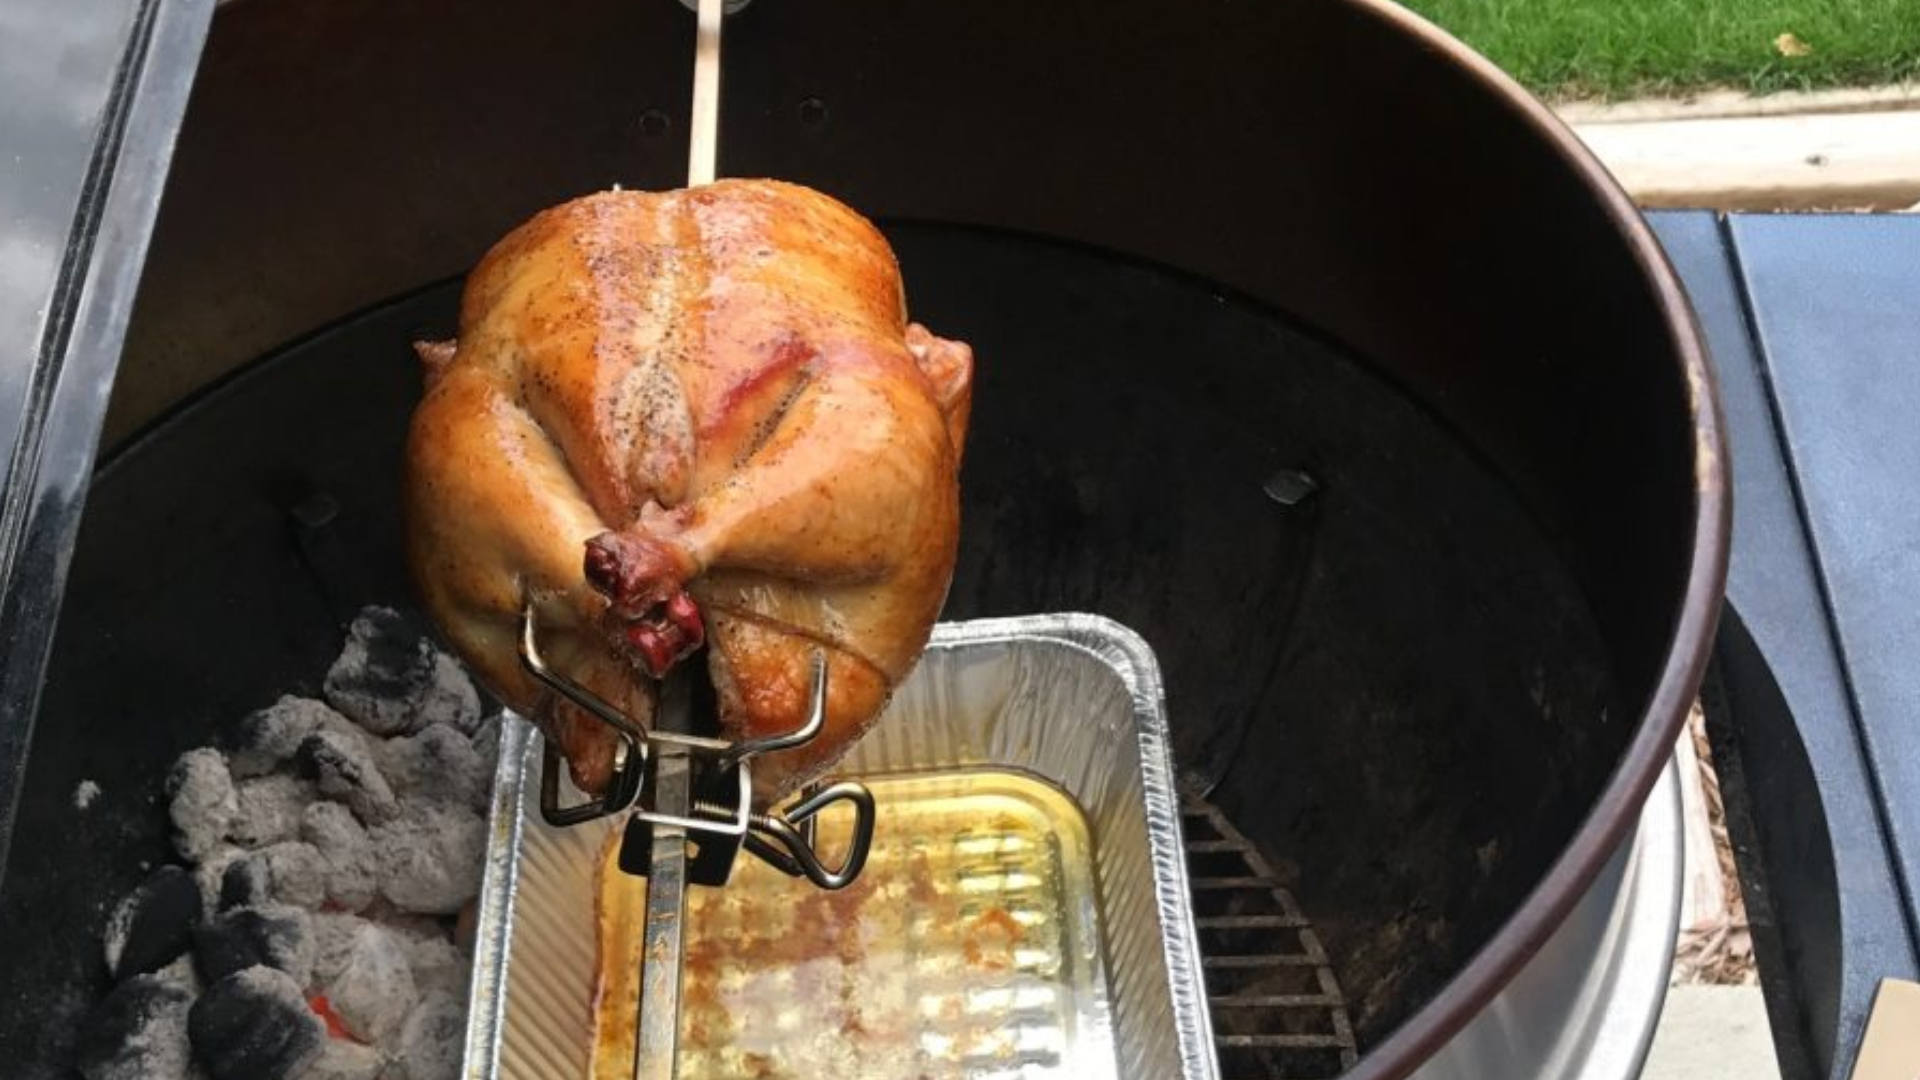 How To Rotisserie Grill Chicken on a Weber Kettle